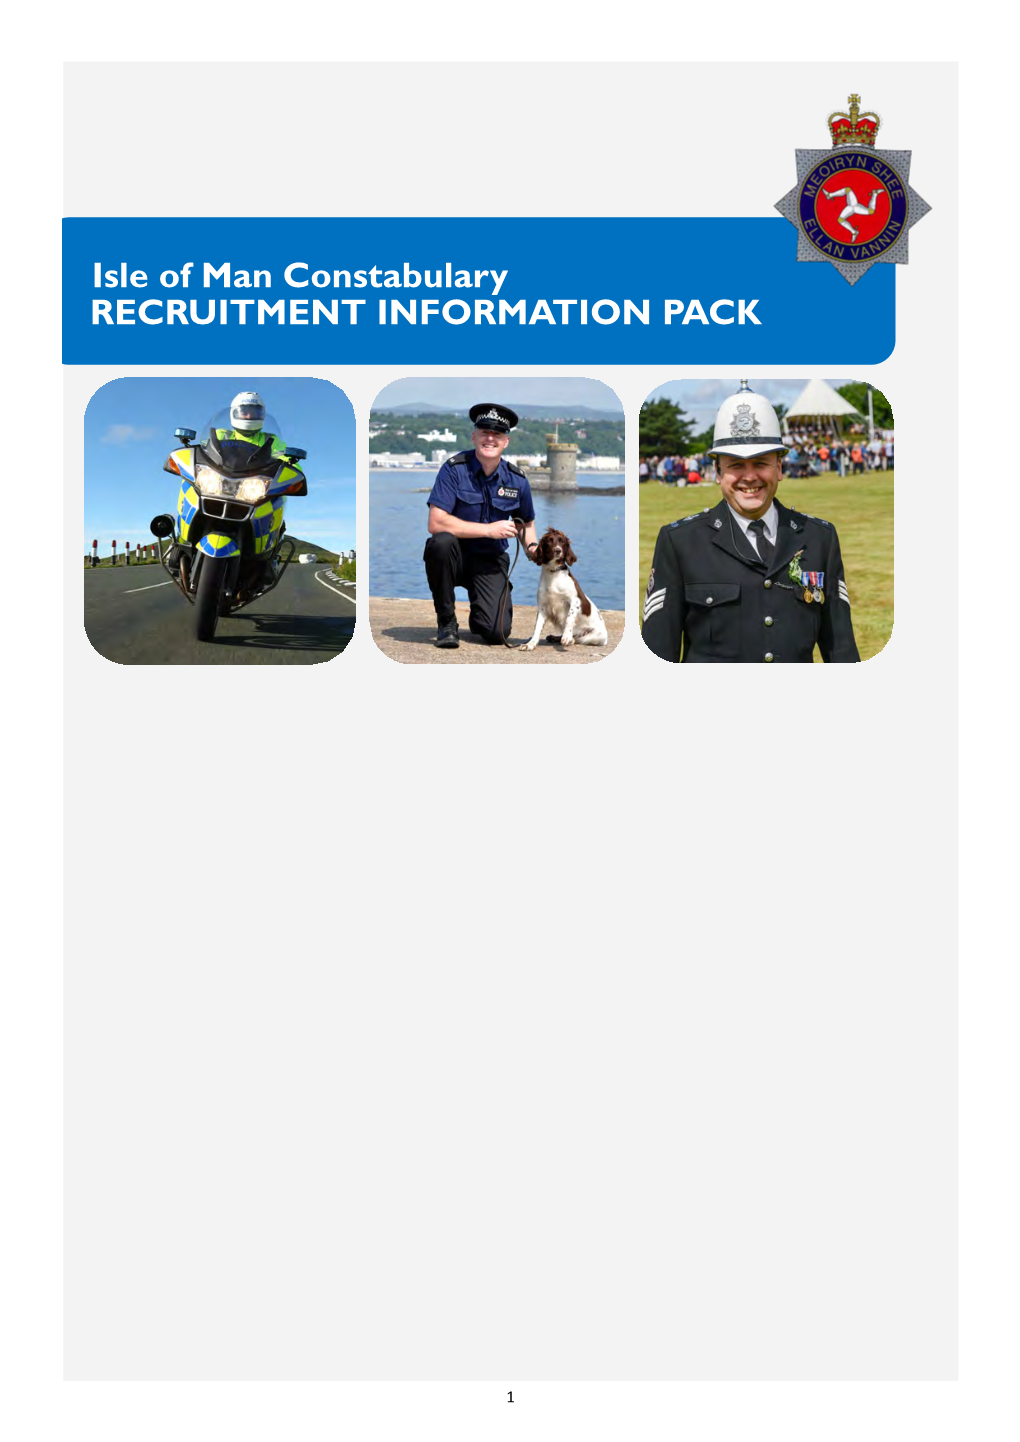 Information Pack Containing All Documents for the IOM